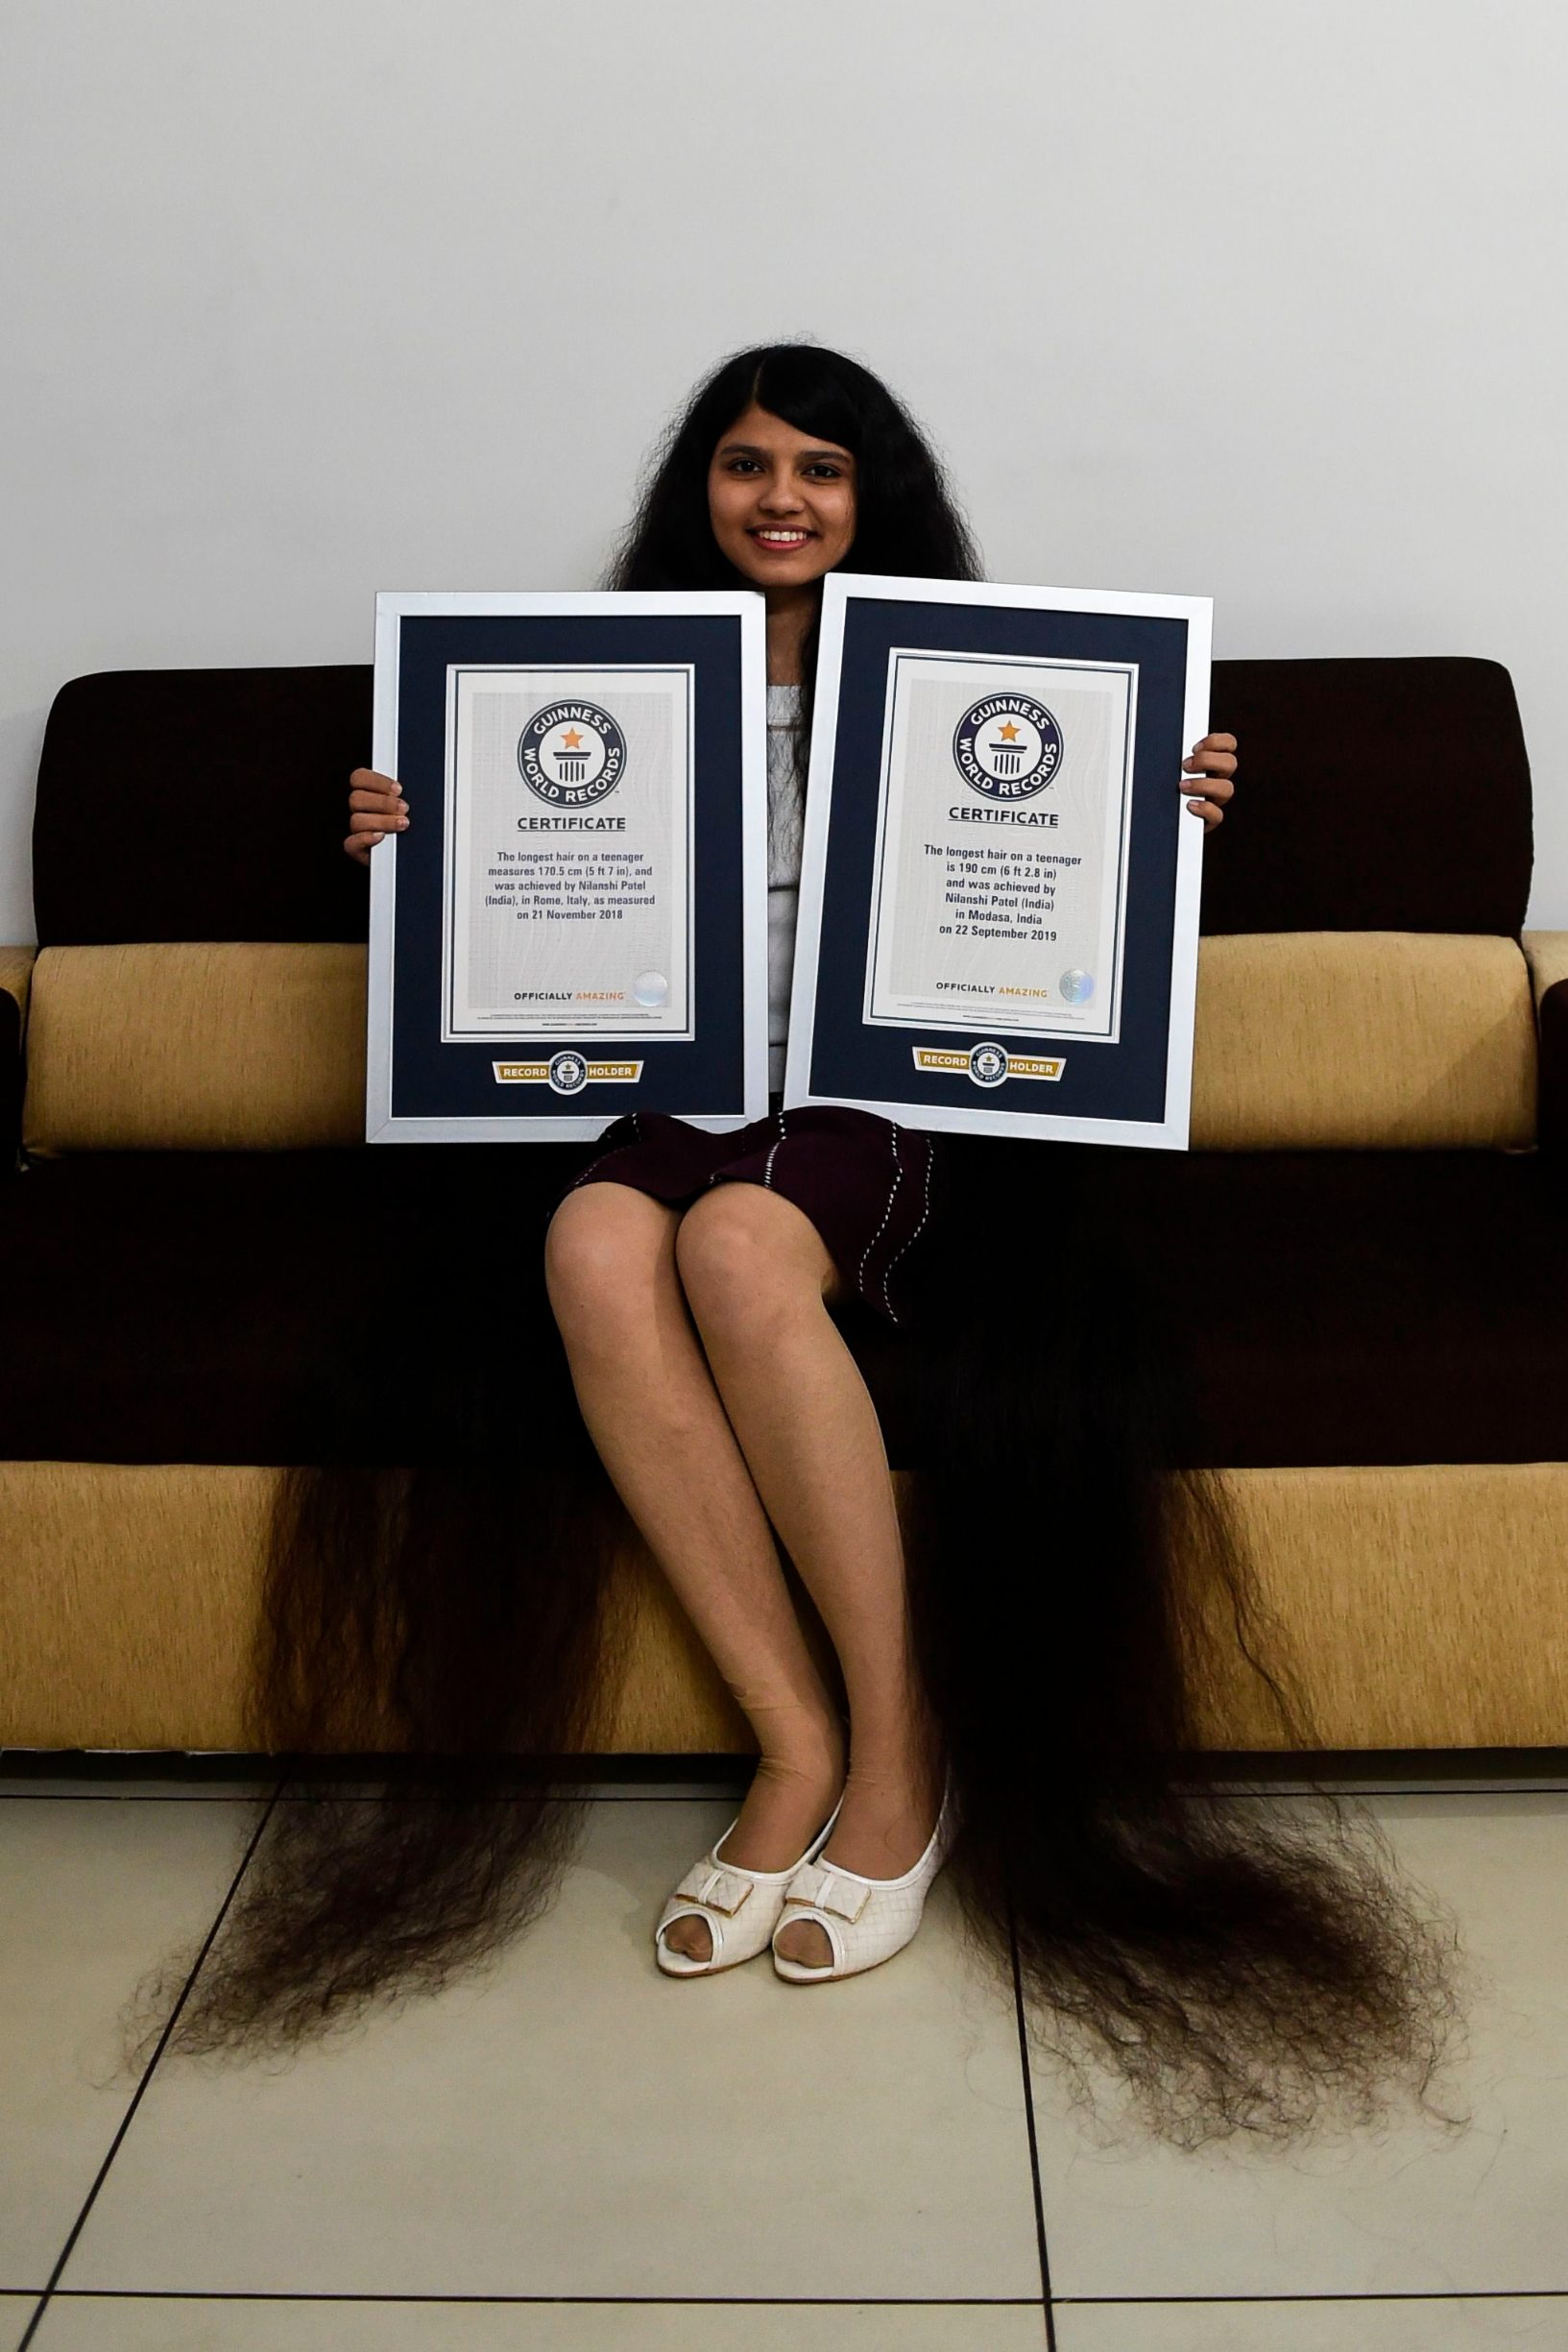 Nilanshi Patel, 17, poses for picture with the 2018 (L) and 2019 Guinness World Record certificates for the longest hair in the teenager category, at Modasa town, some 110 Kms from Ahmedabad on January 19, 2020. - Patel has been awarded the 2019 Guinness World Record for the longest hair at 190 cm in the teenager category. In 2018 she bagged Guinness World Record in the same category at 170,5 cm. (Photo by SAM PANTHAKY / AFP)